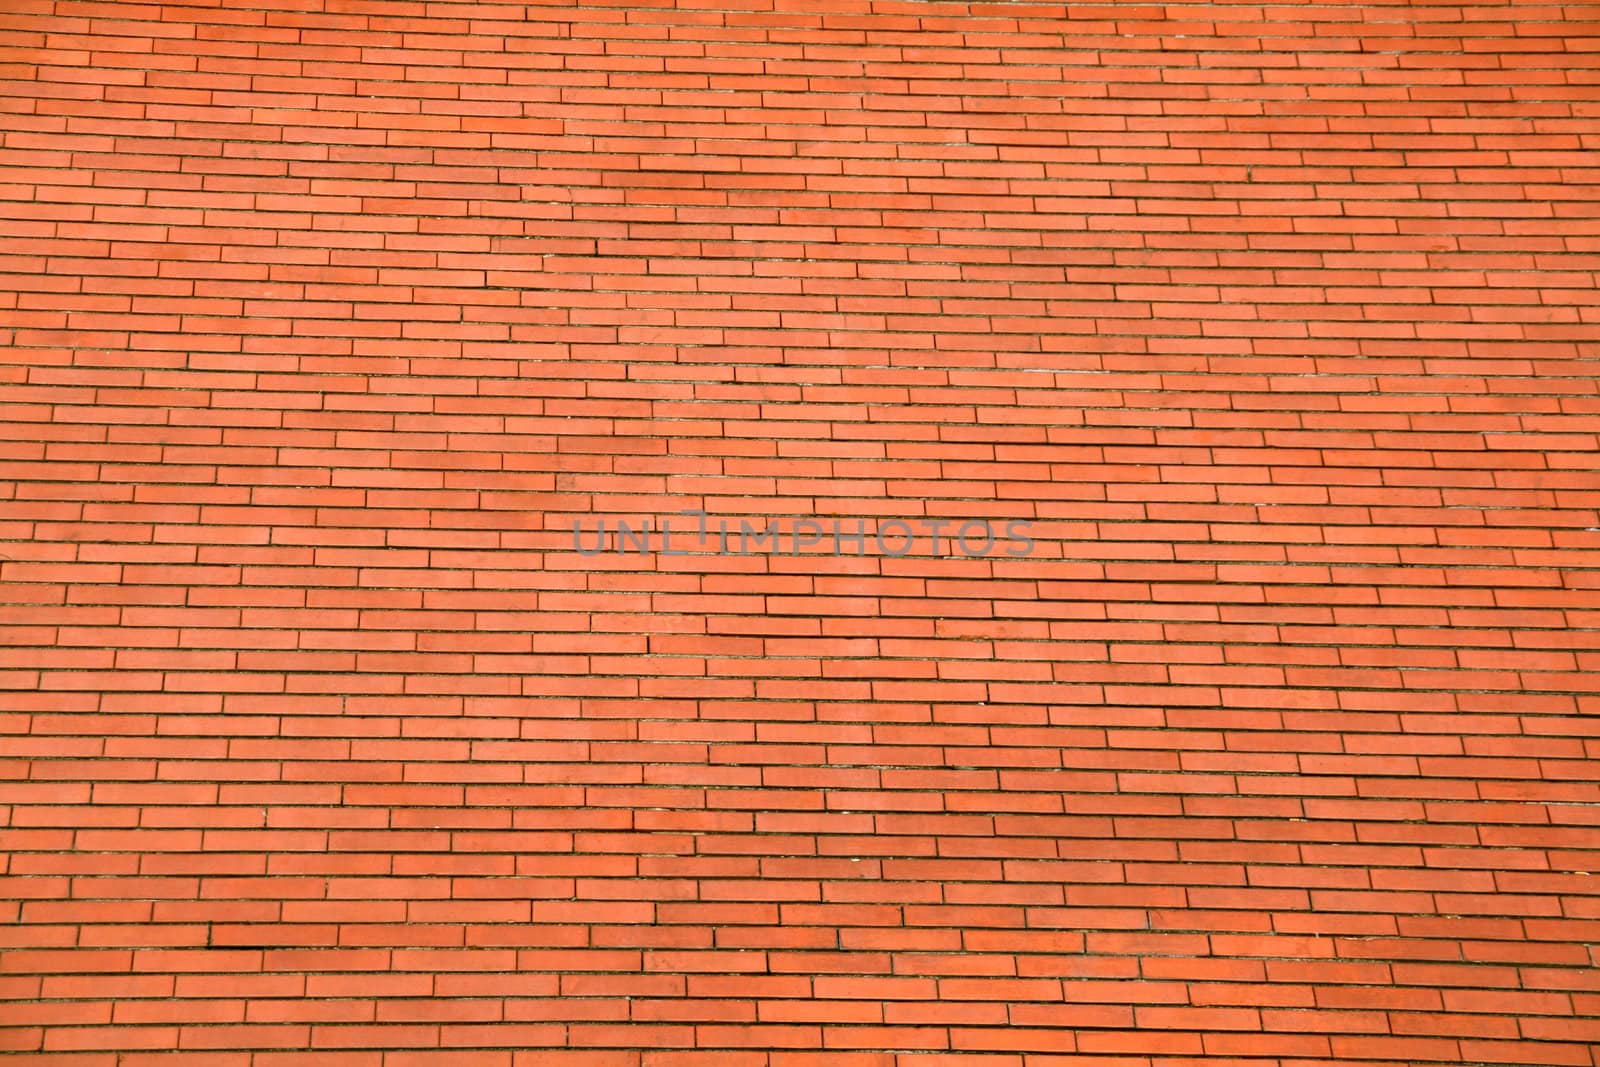 background or pattern of a big red orange brick wall